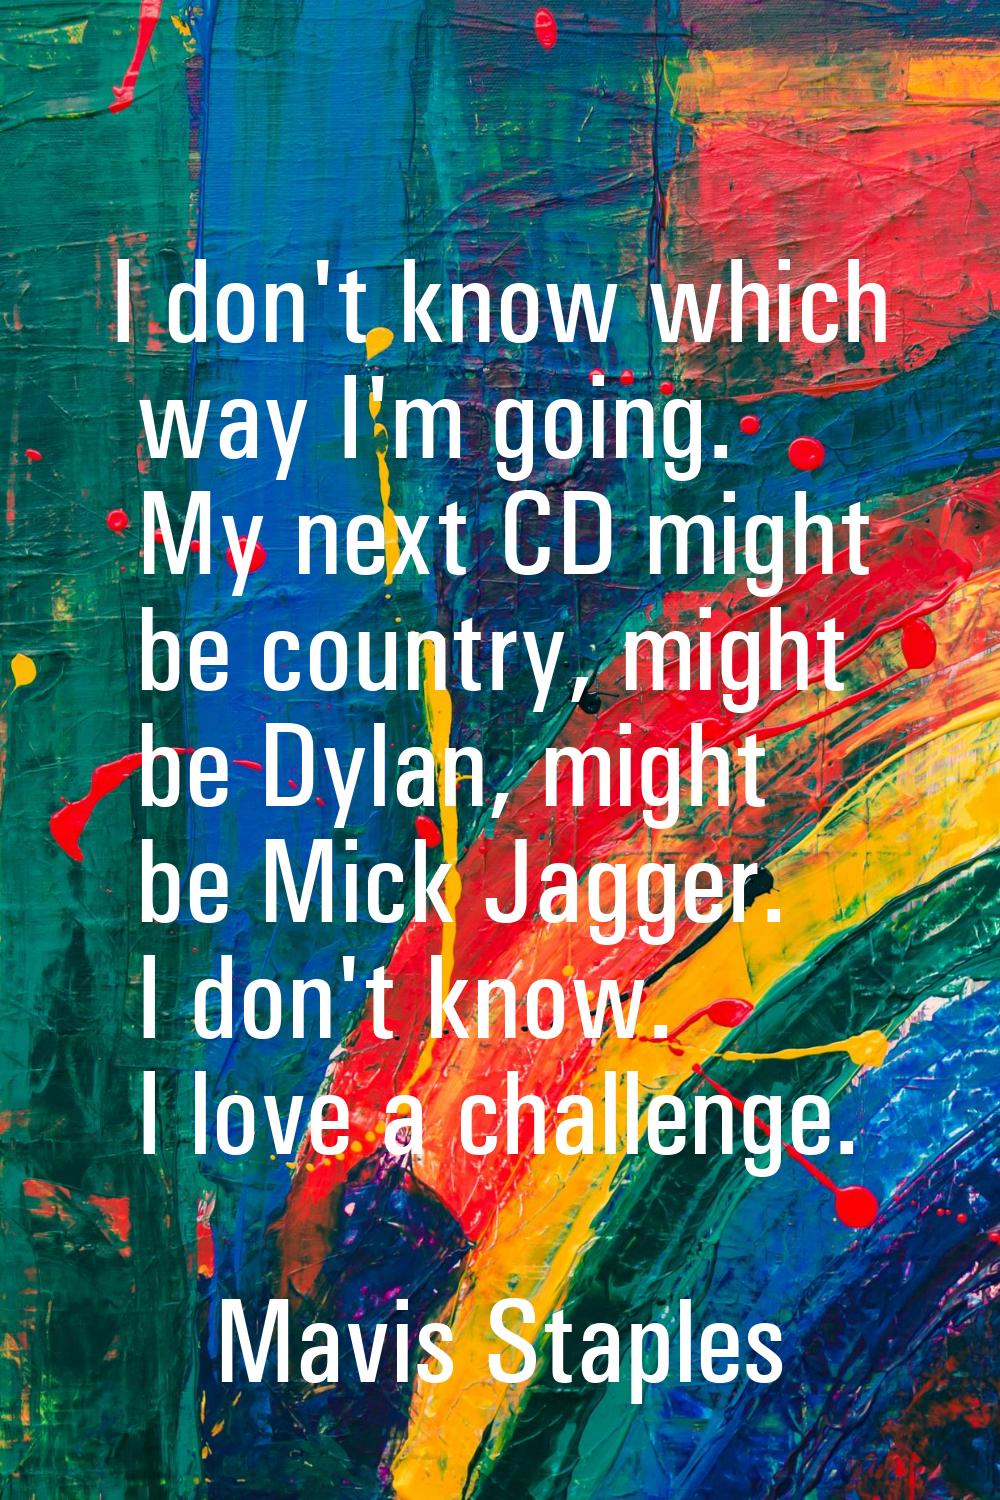 I don't know which way I'm going. My next CD might be country, might be Dylan, might be Mick Jagger